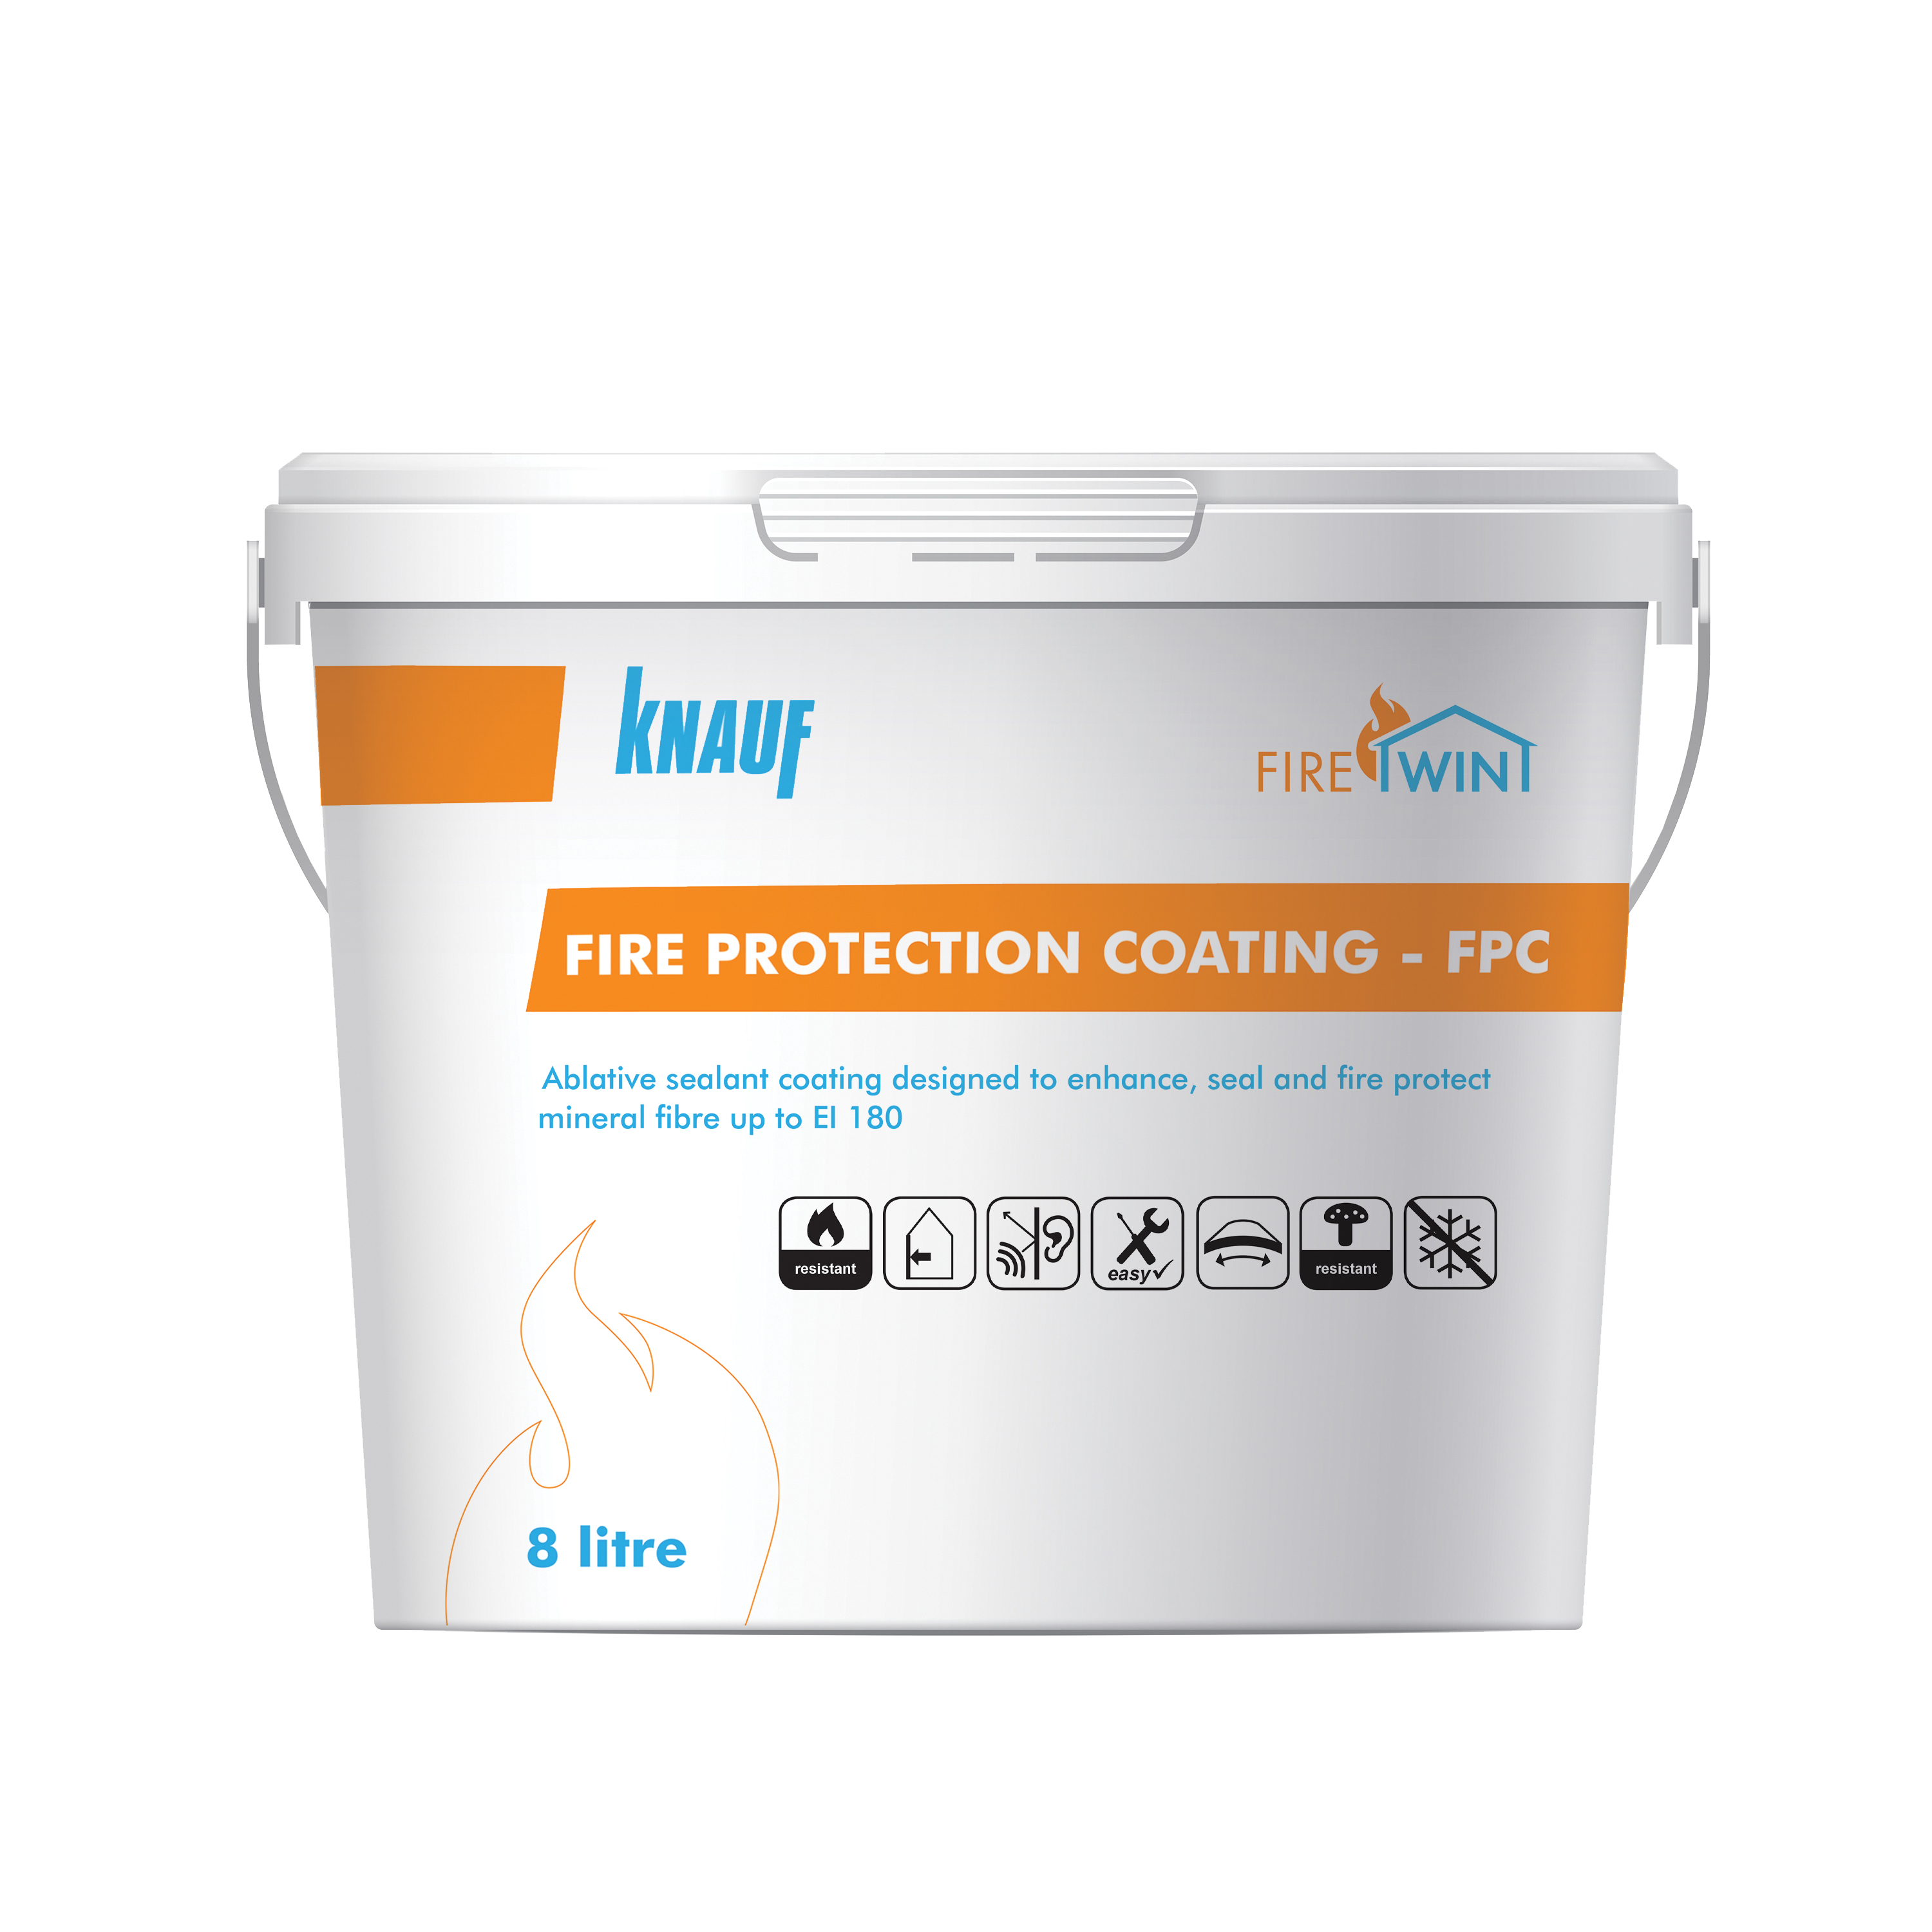 Knauf - Fire Protection Coating (FPC)